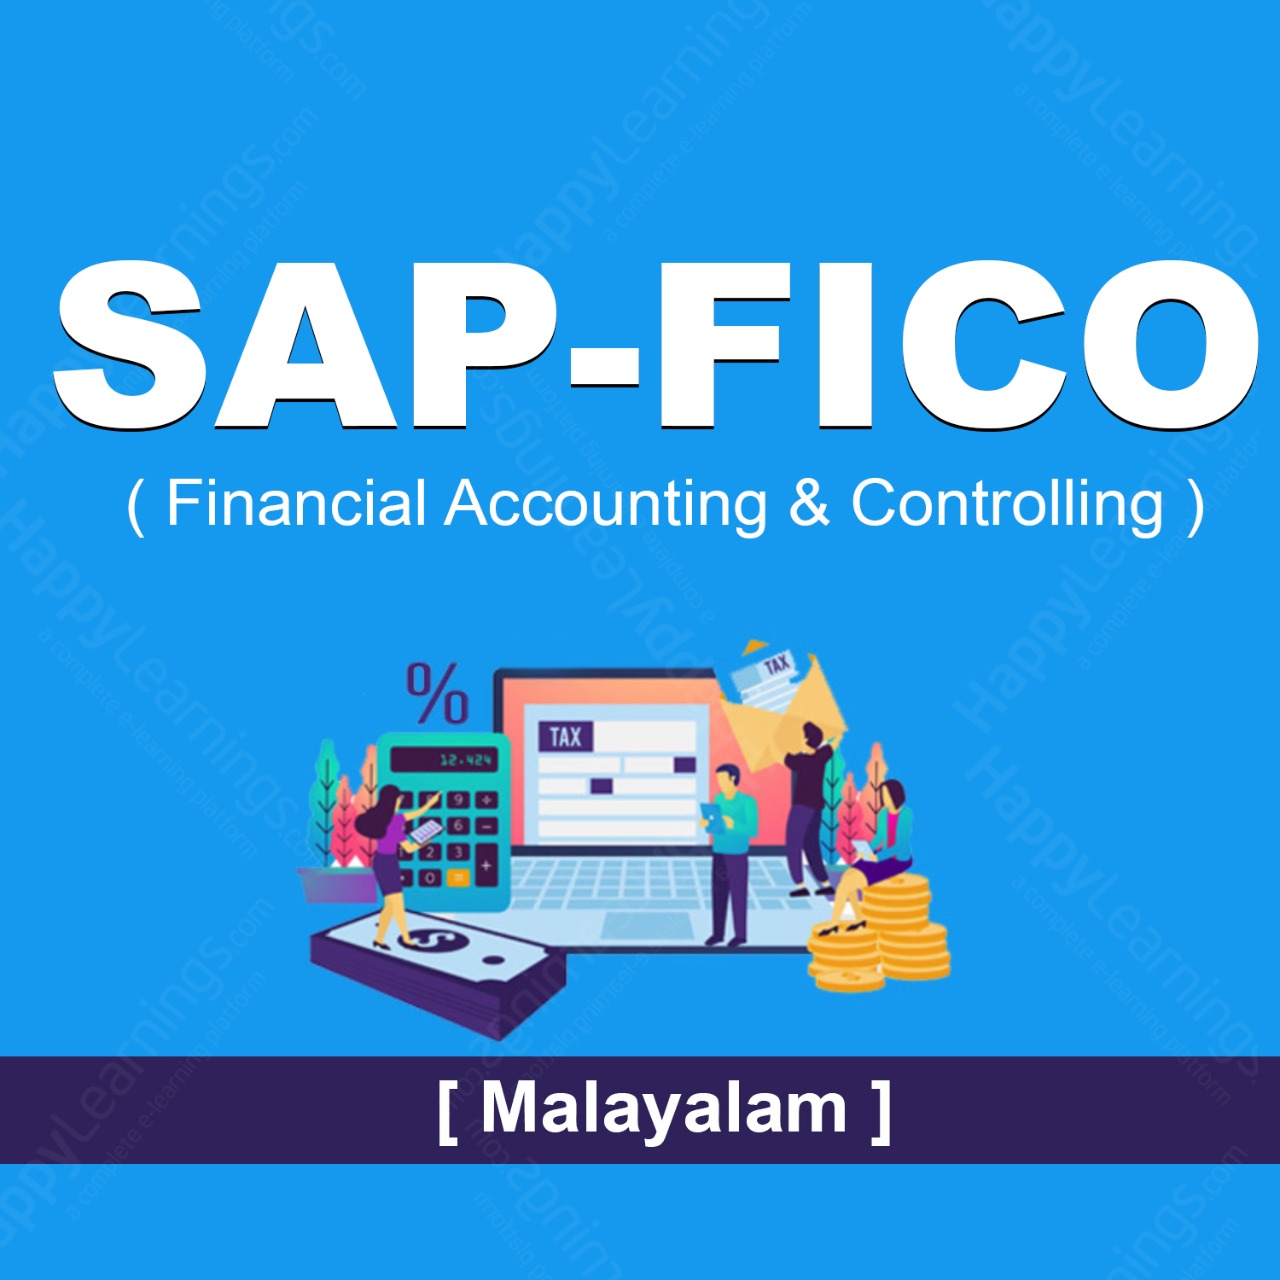 Sap FICO (Financial Accounting & Controlling)